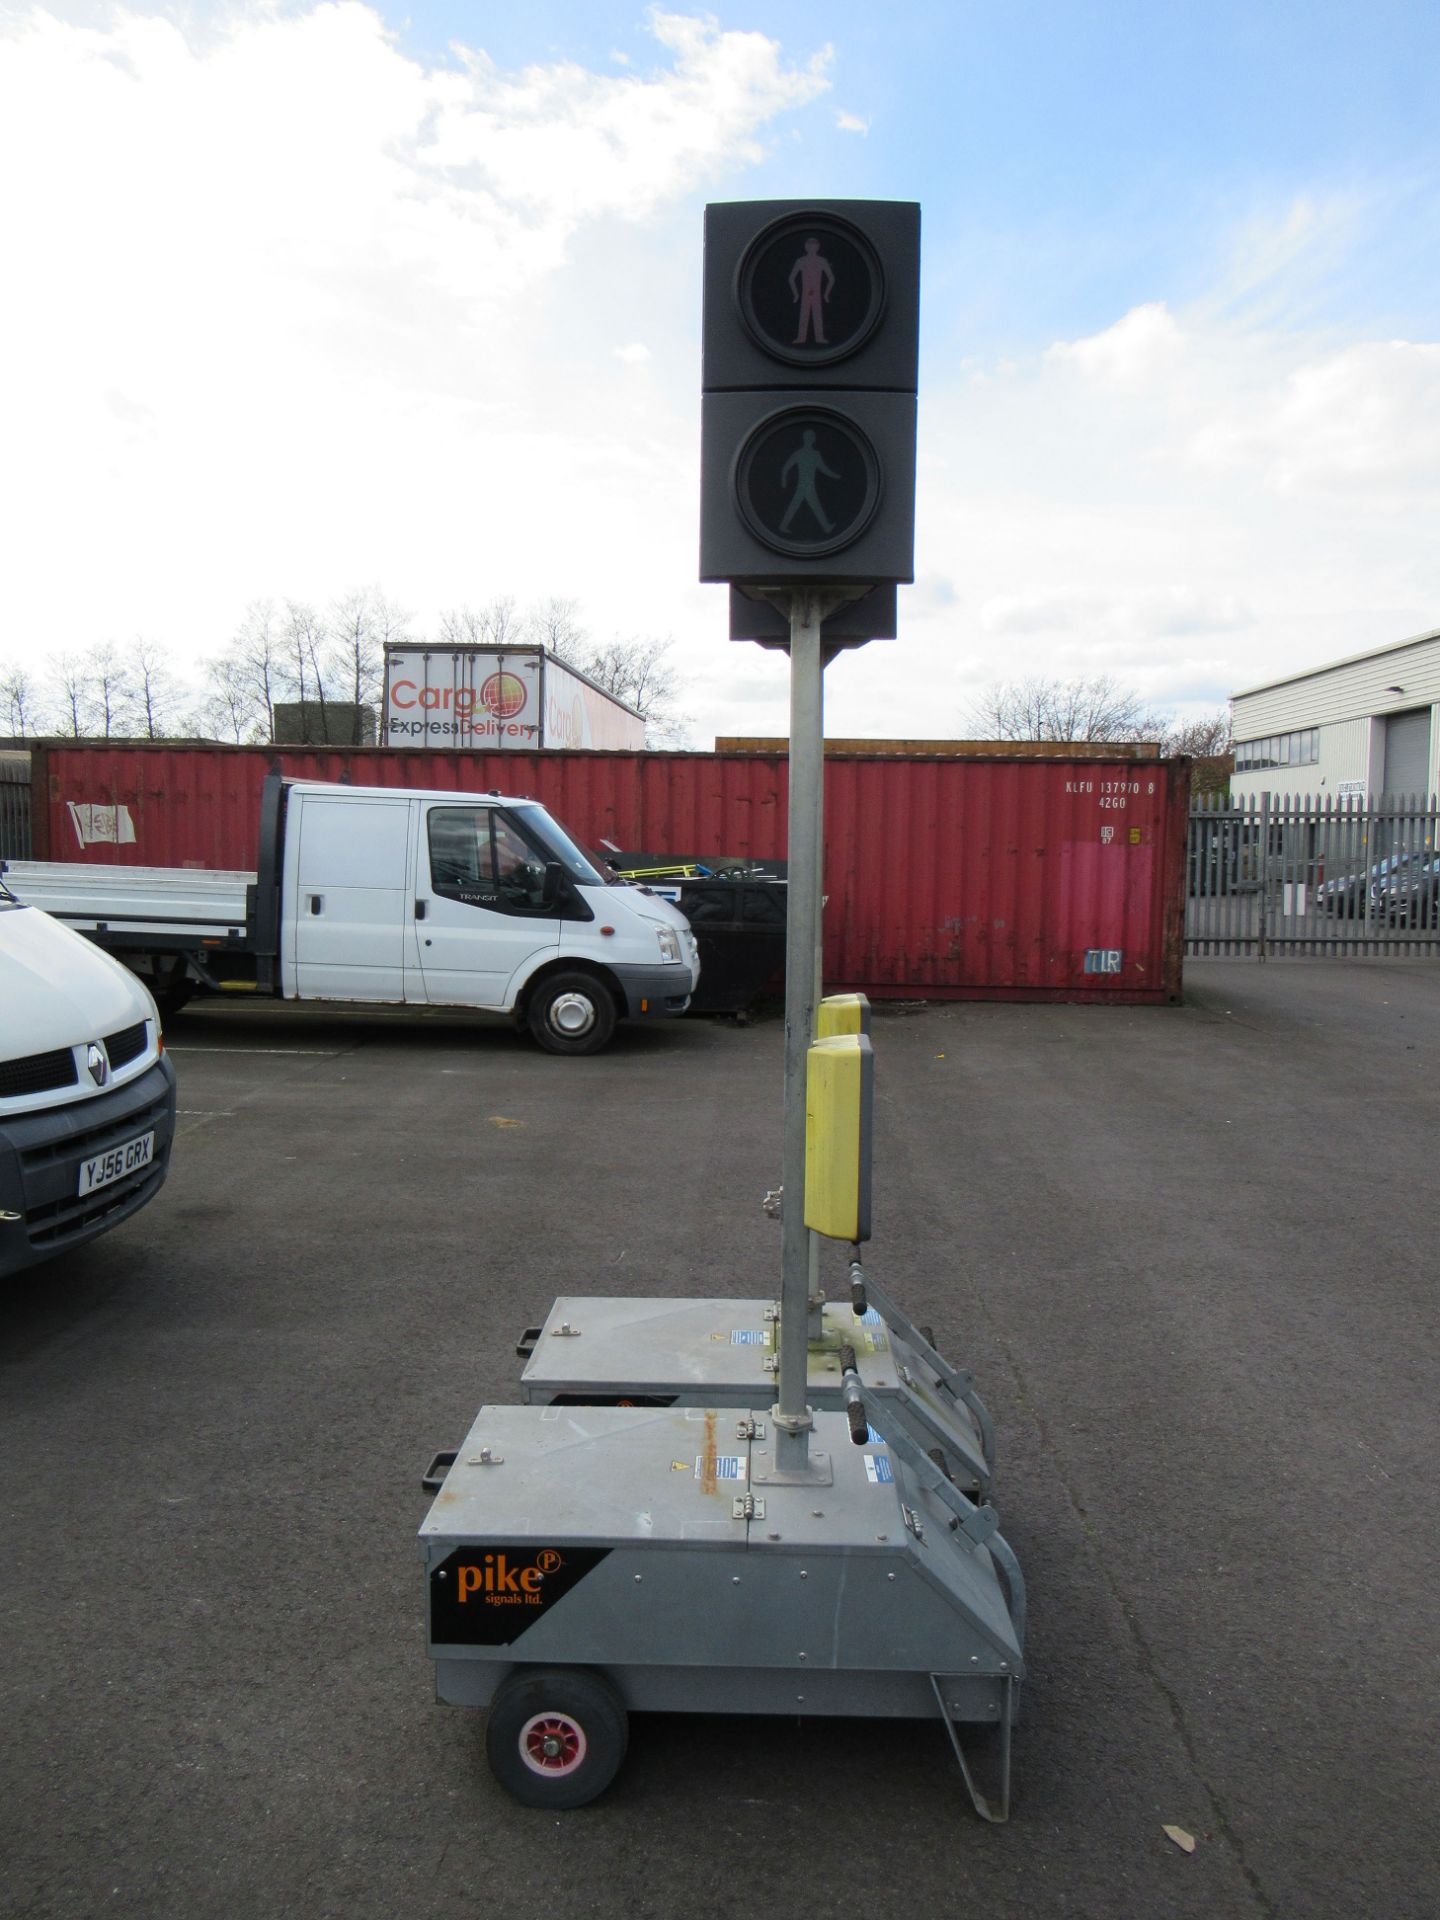 A Pair of Pike Signals Ltd "Pedestrian" Battery Powered Portable Light Units - Image 2 of 7